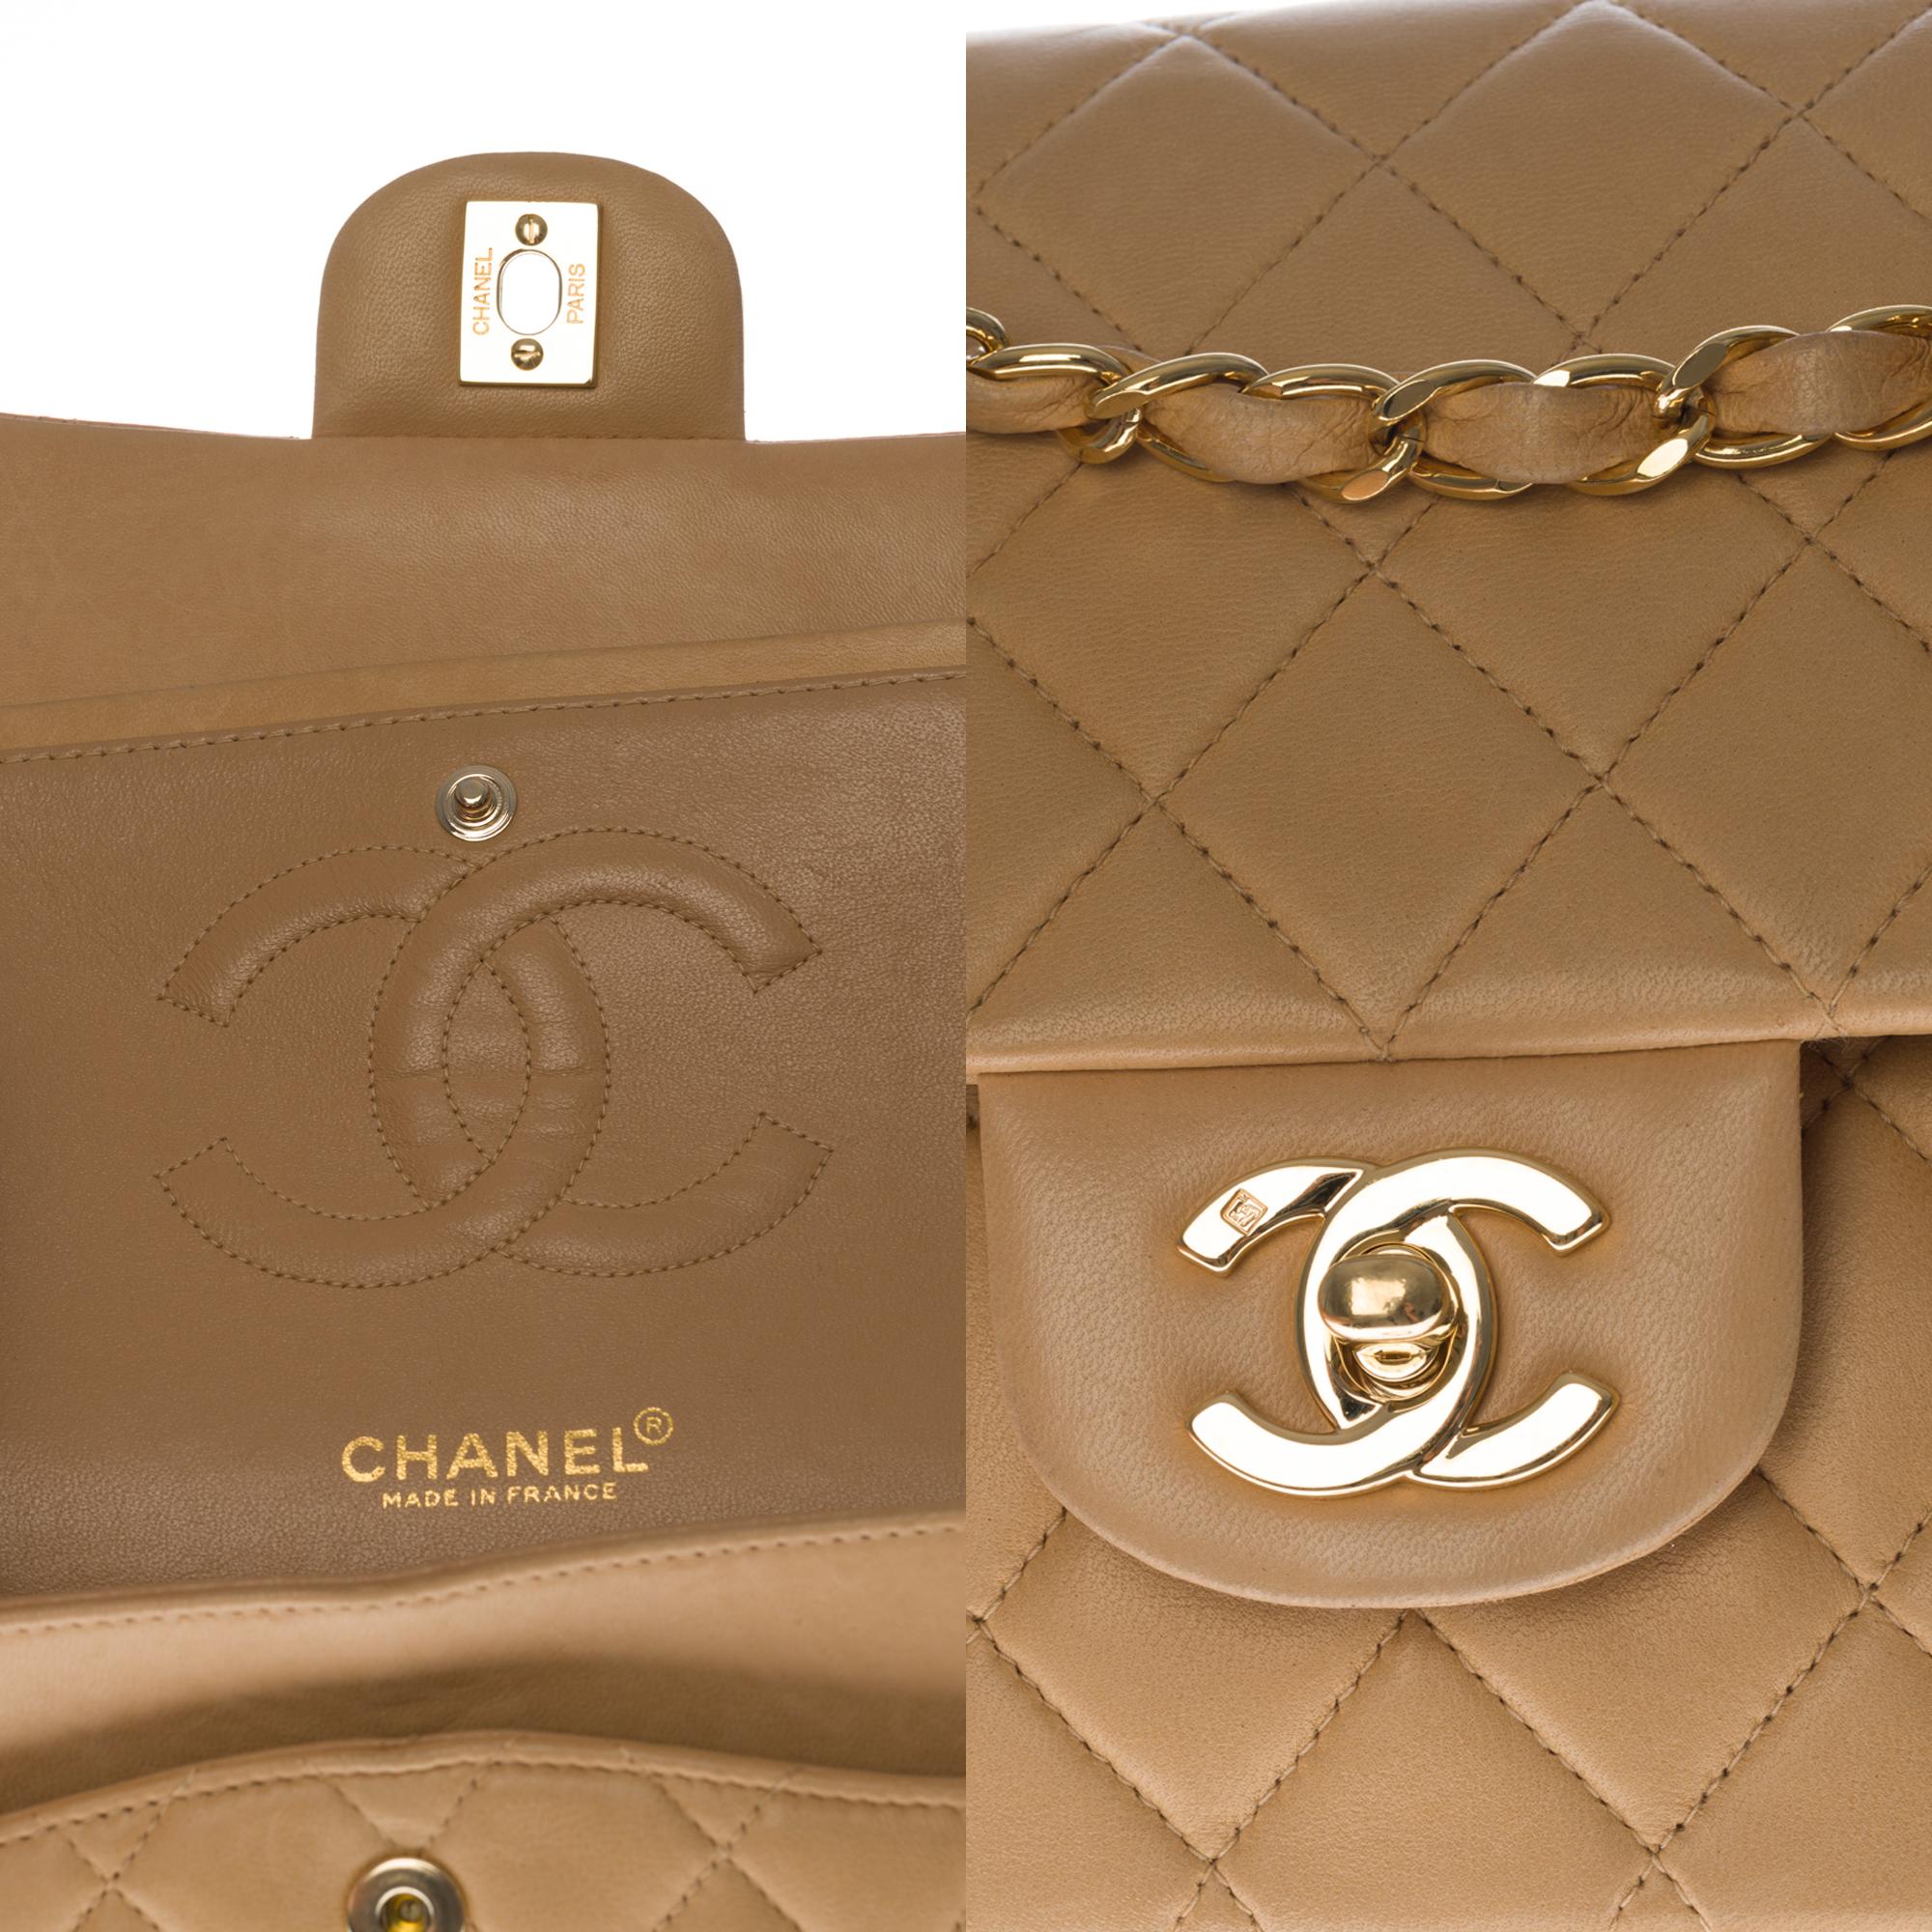 Women's Chanel Timeless double flap Medium Shoulder bag in beige quilted leather, GHW